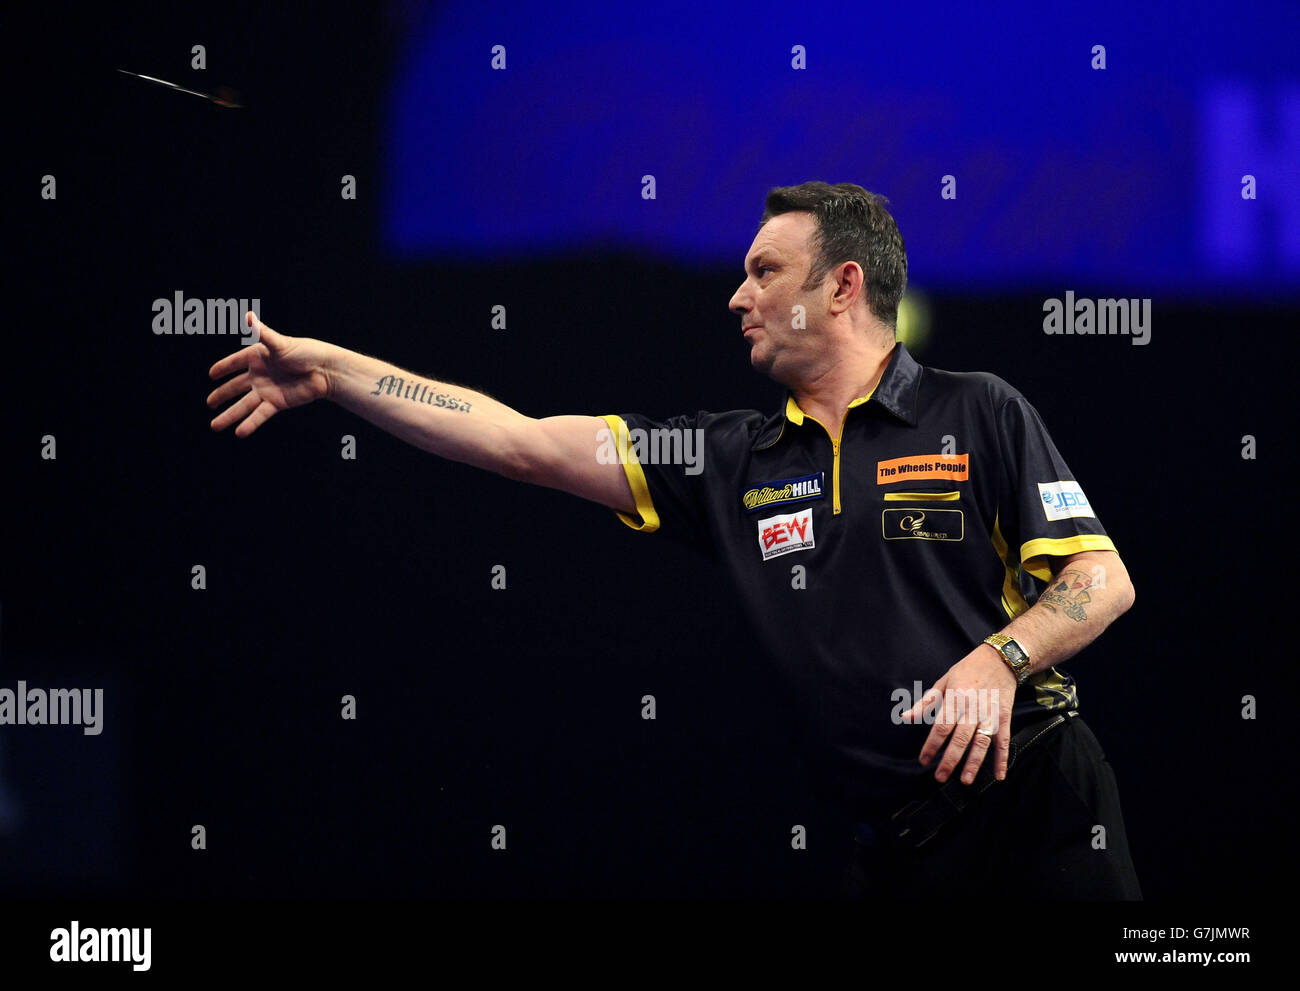 Darren Webster in his match against Dean Winstanley during the William Hill World Darts Championship at Alexandra Palace, London. Stock Photo